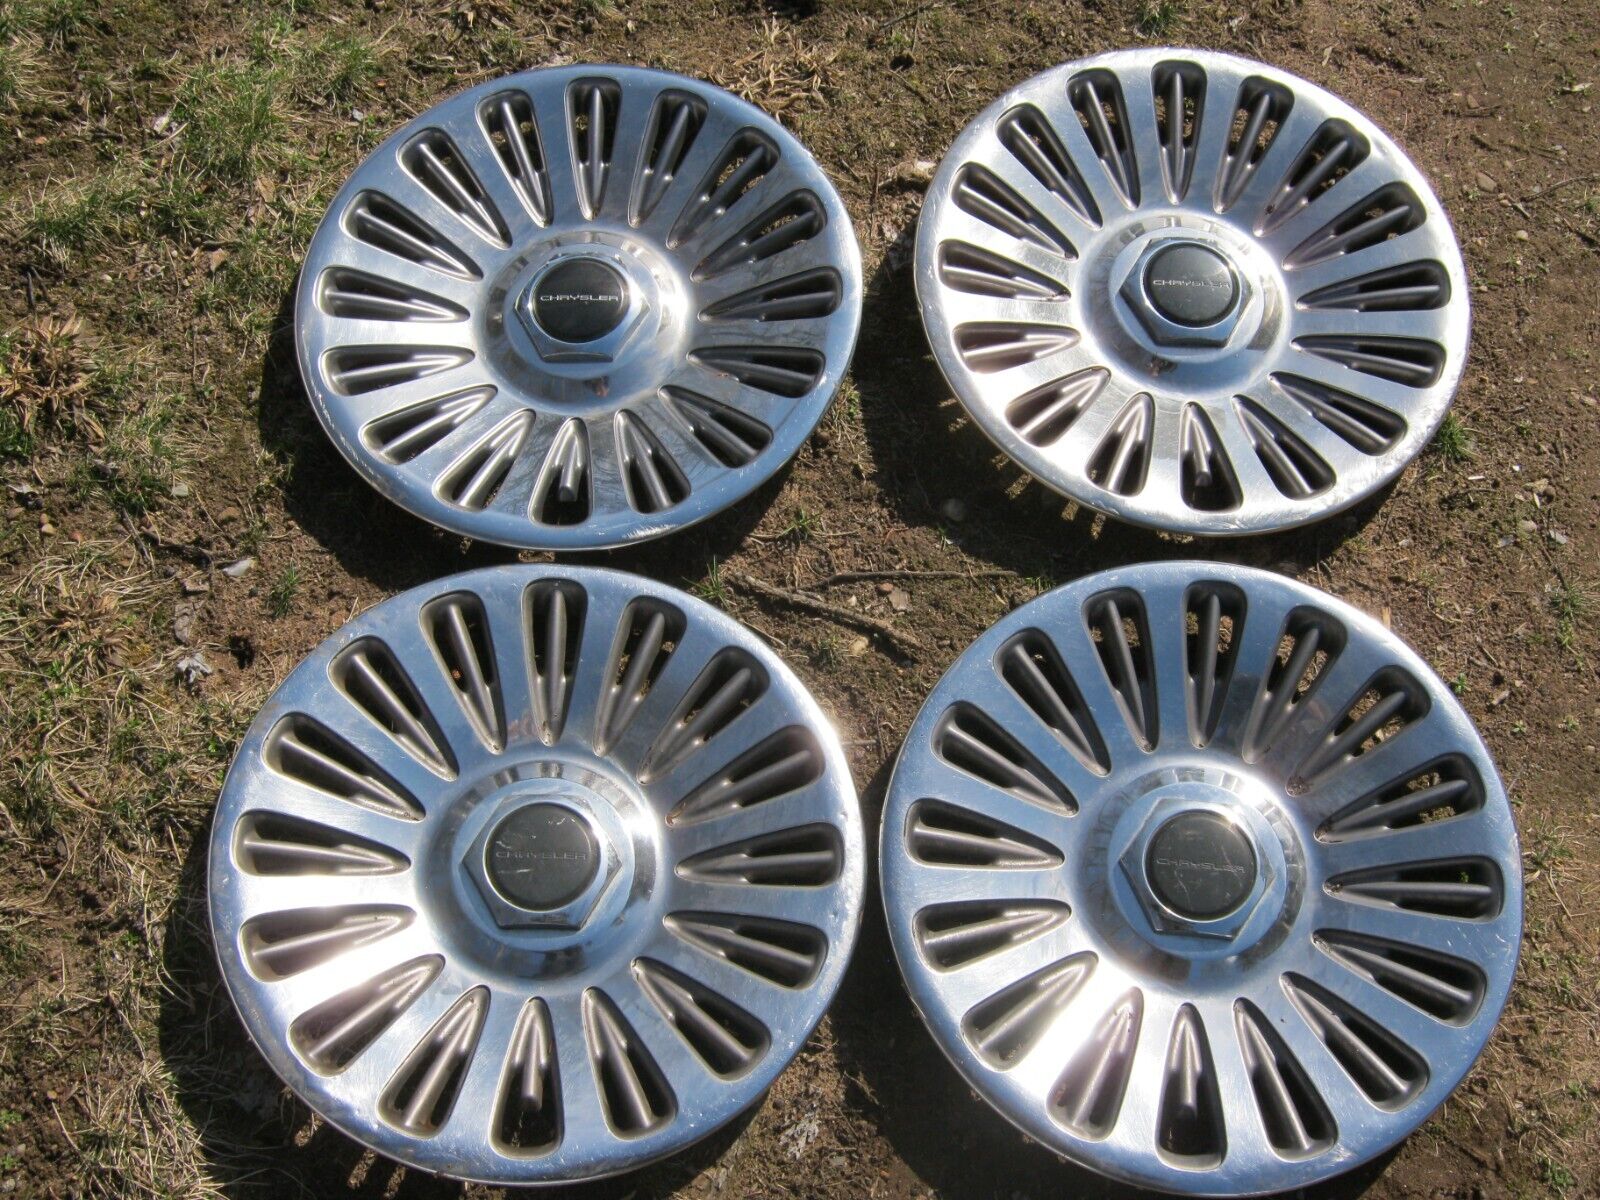 Genuine 1994 to 1996 New Yorker Concorde 16 inch metal hubcaps wheel covers